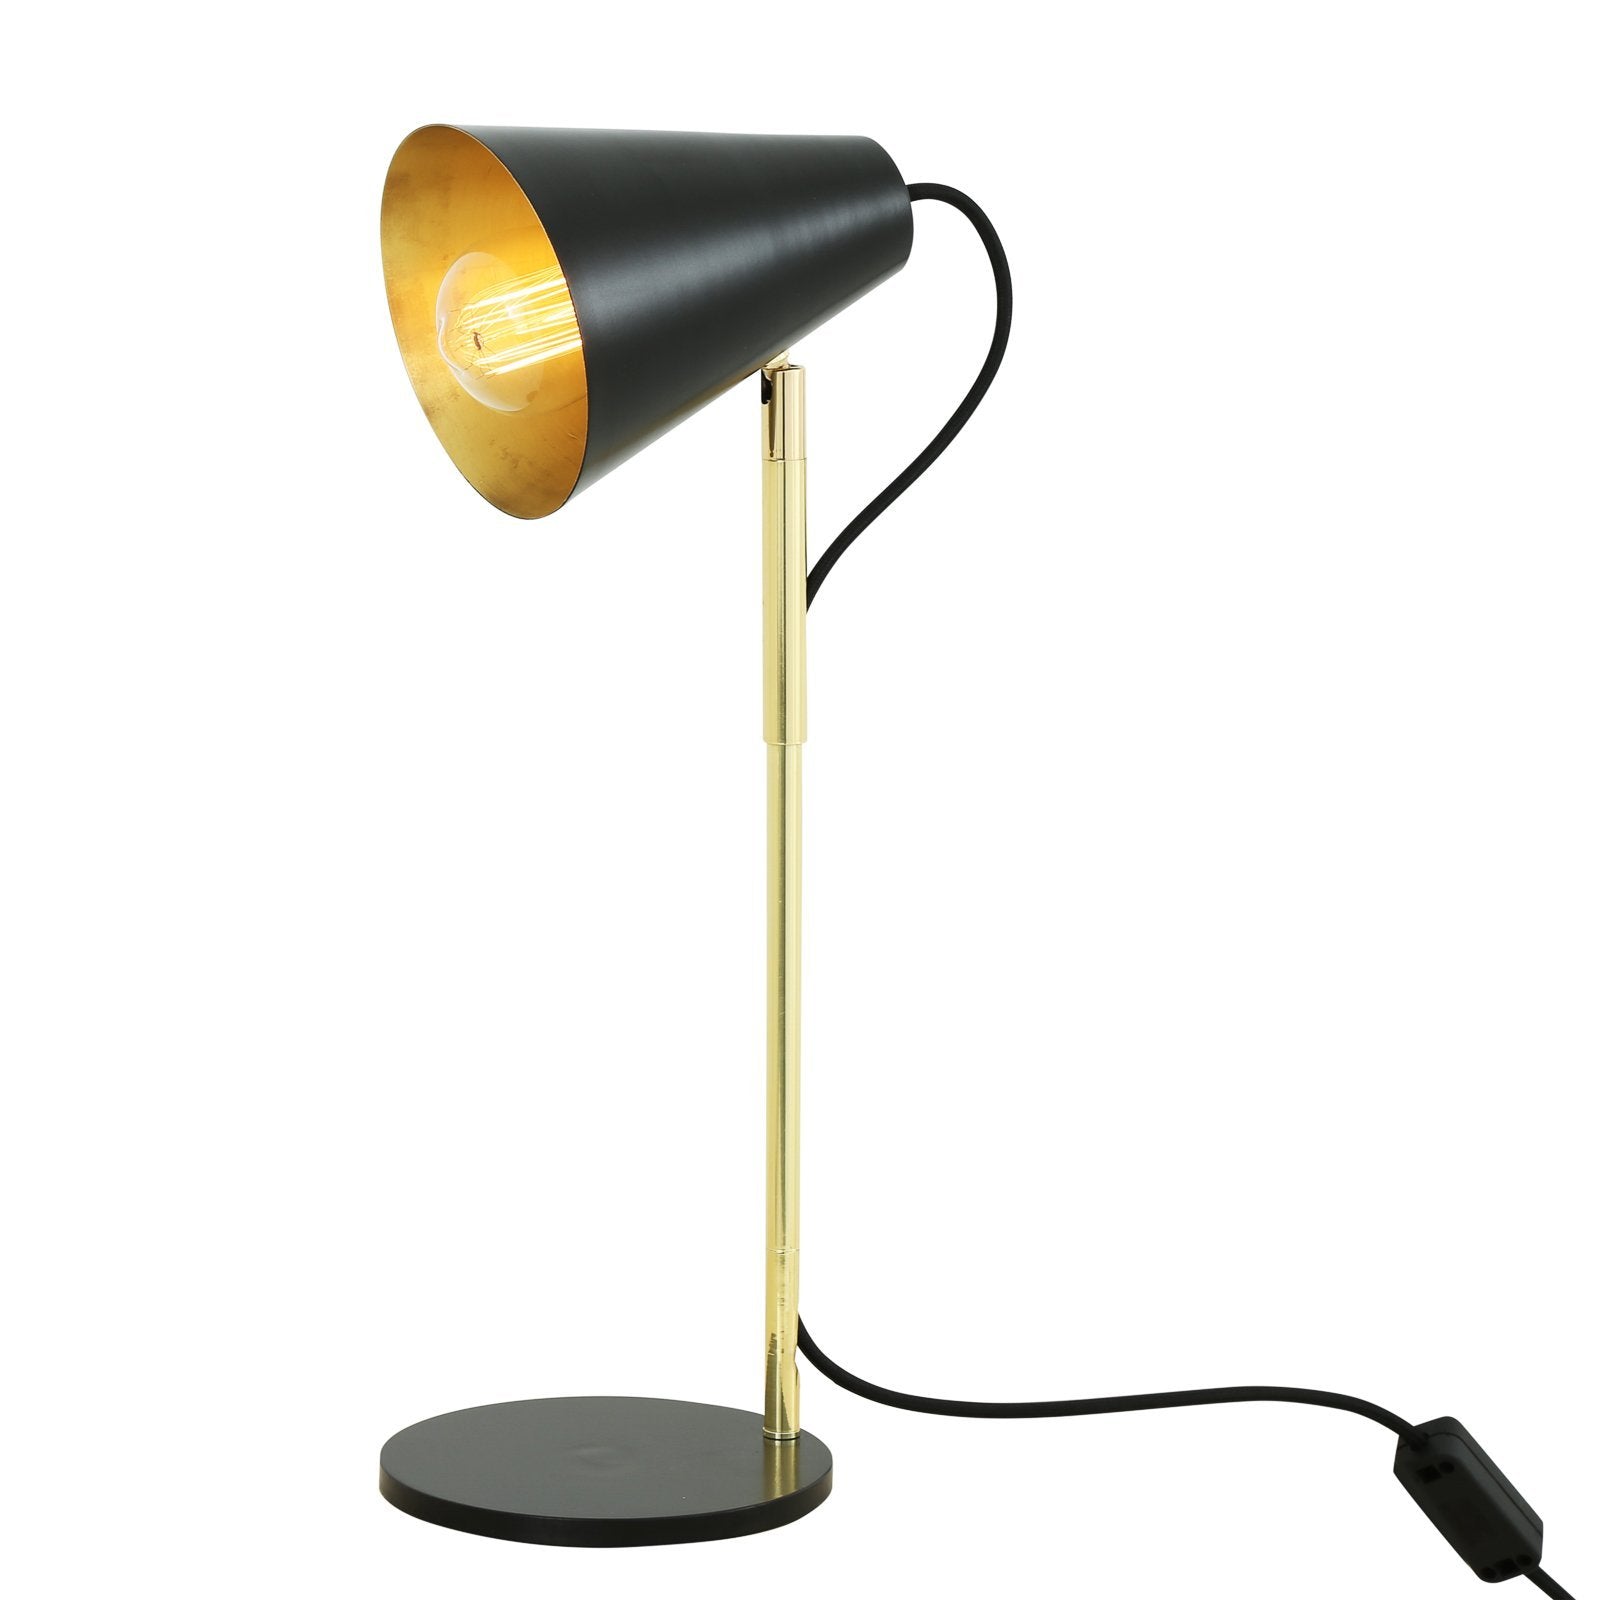 Lusaka Table Lamp - Table Lamps from RETROLIGHT. Made by Mullan Lighting.